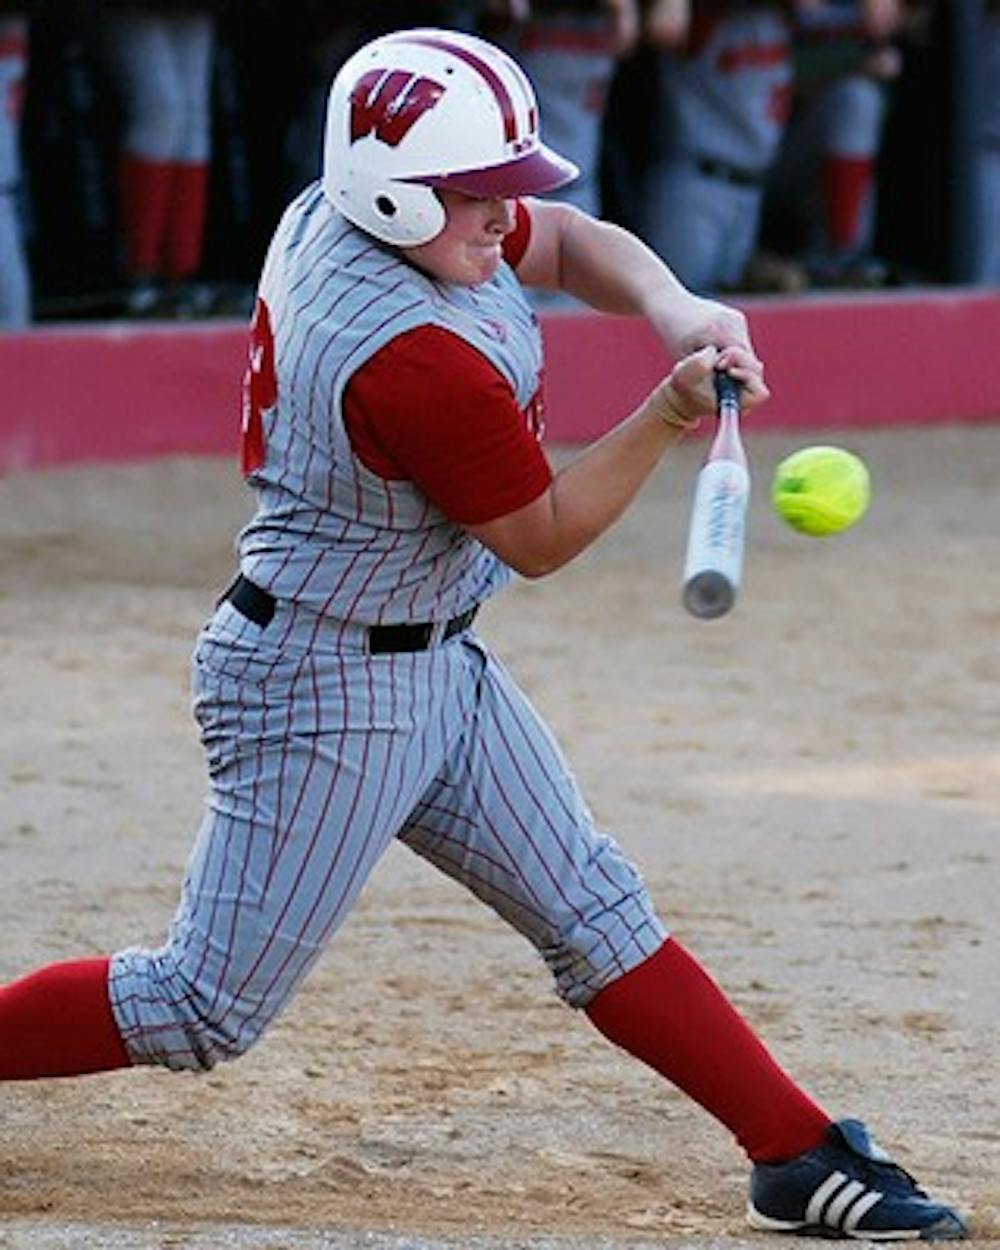 Three losses and out: UW softball team musters one win in Fla.